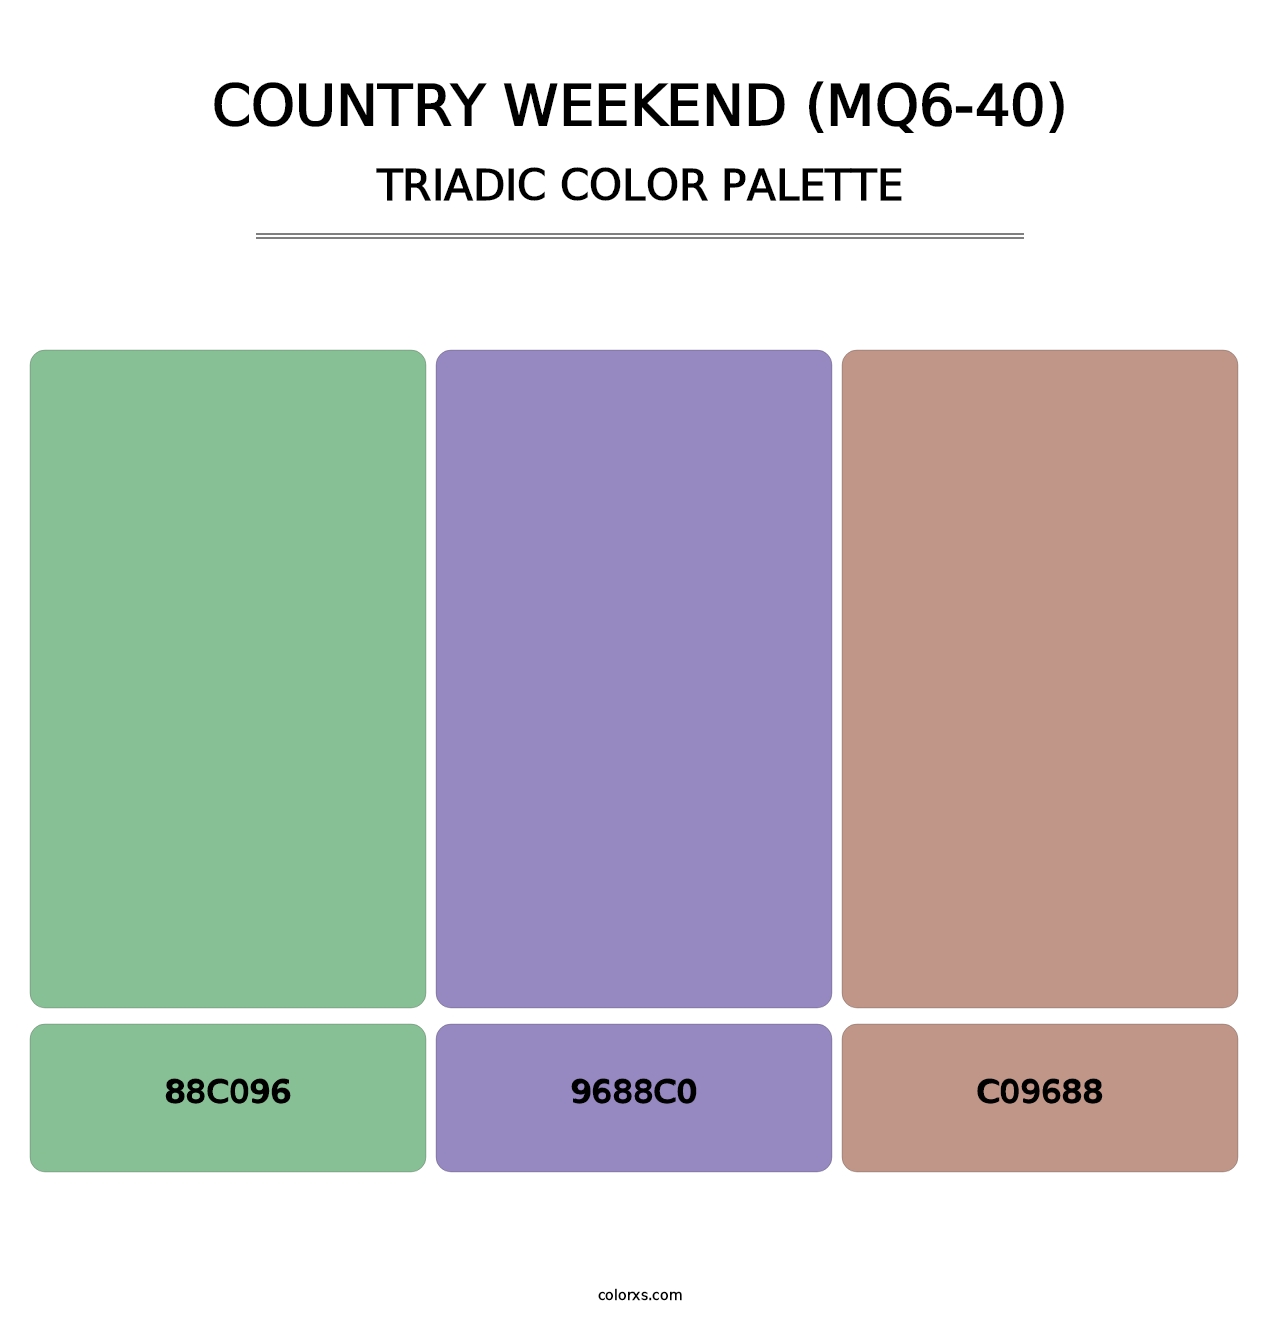 Country Weekend (MQ6-40) - Triadic Color Palette